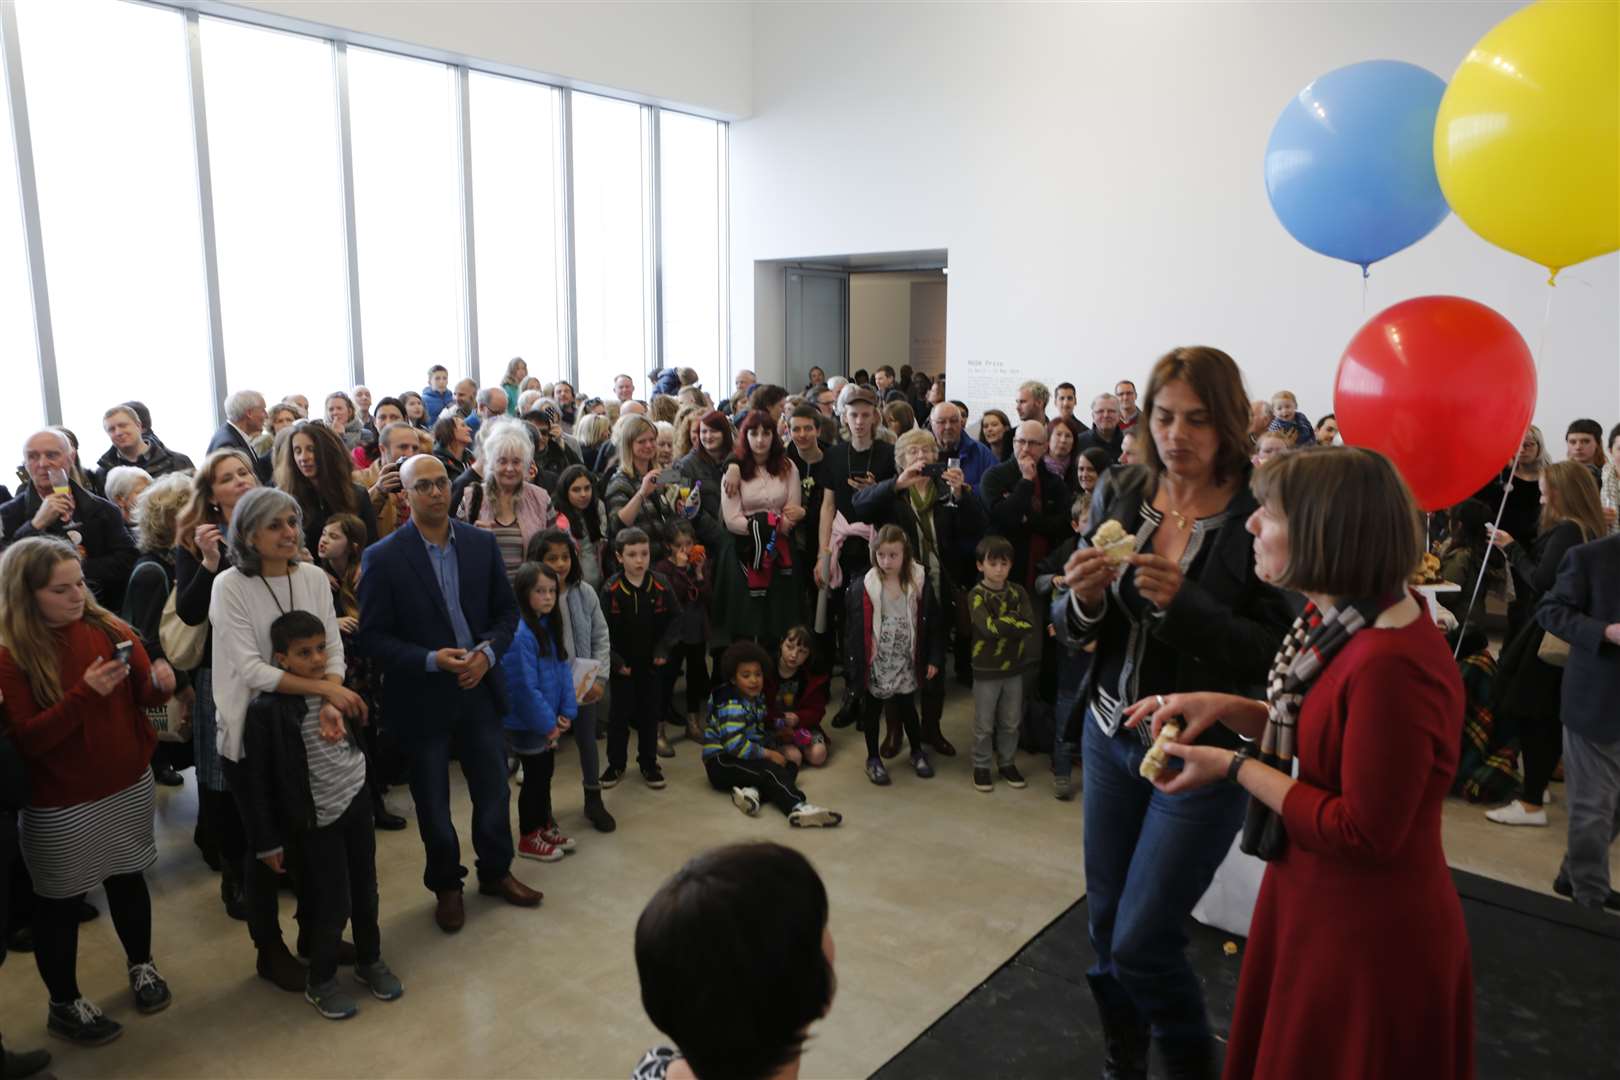 A lot of well wishers attended celebrations for the gallery's fifth birthday